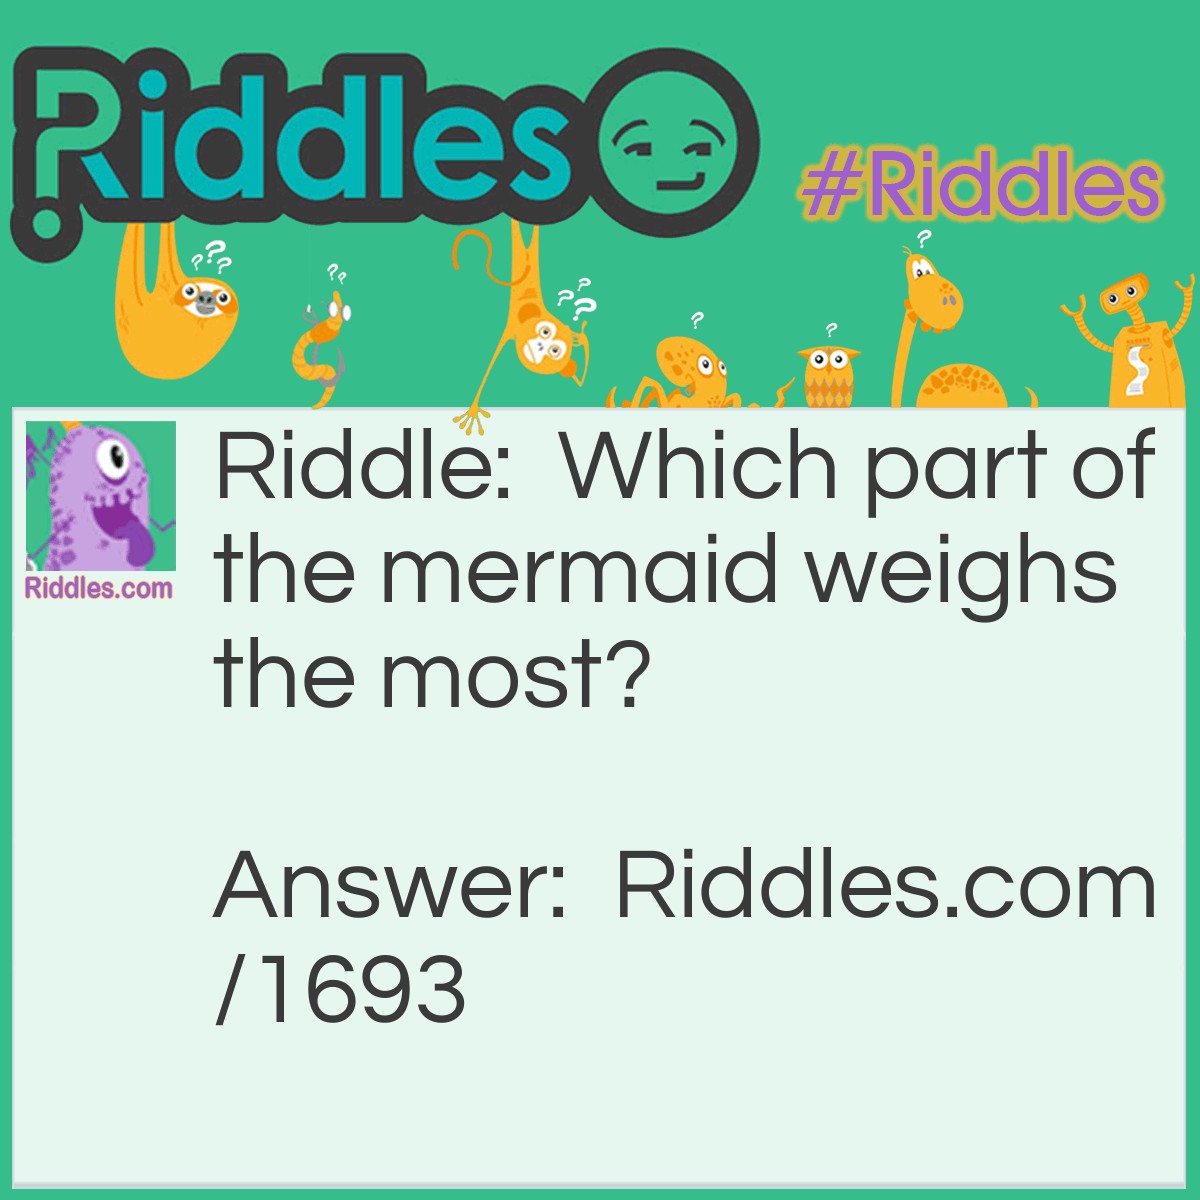 Riddle: Which part of the mermaid weighs the most? Answer: Her scales.